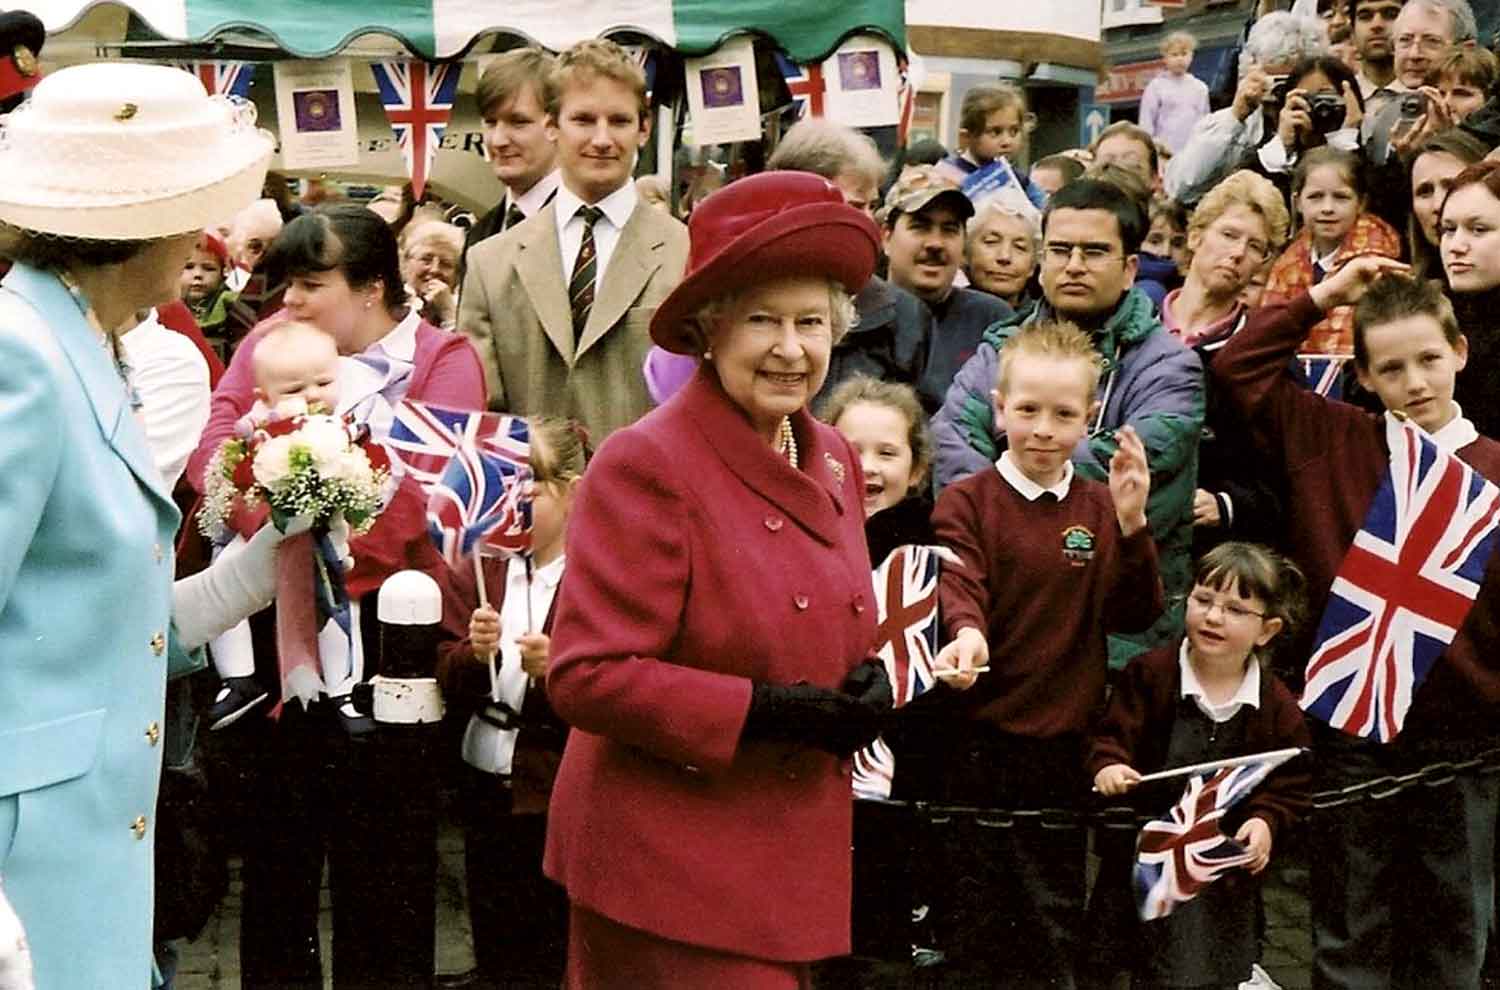 Queen Elizabeth smiles and looks toward the camera as a crowd of people stand behind her, some holding flags of the UK.